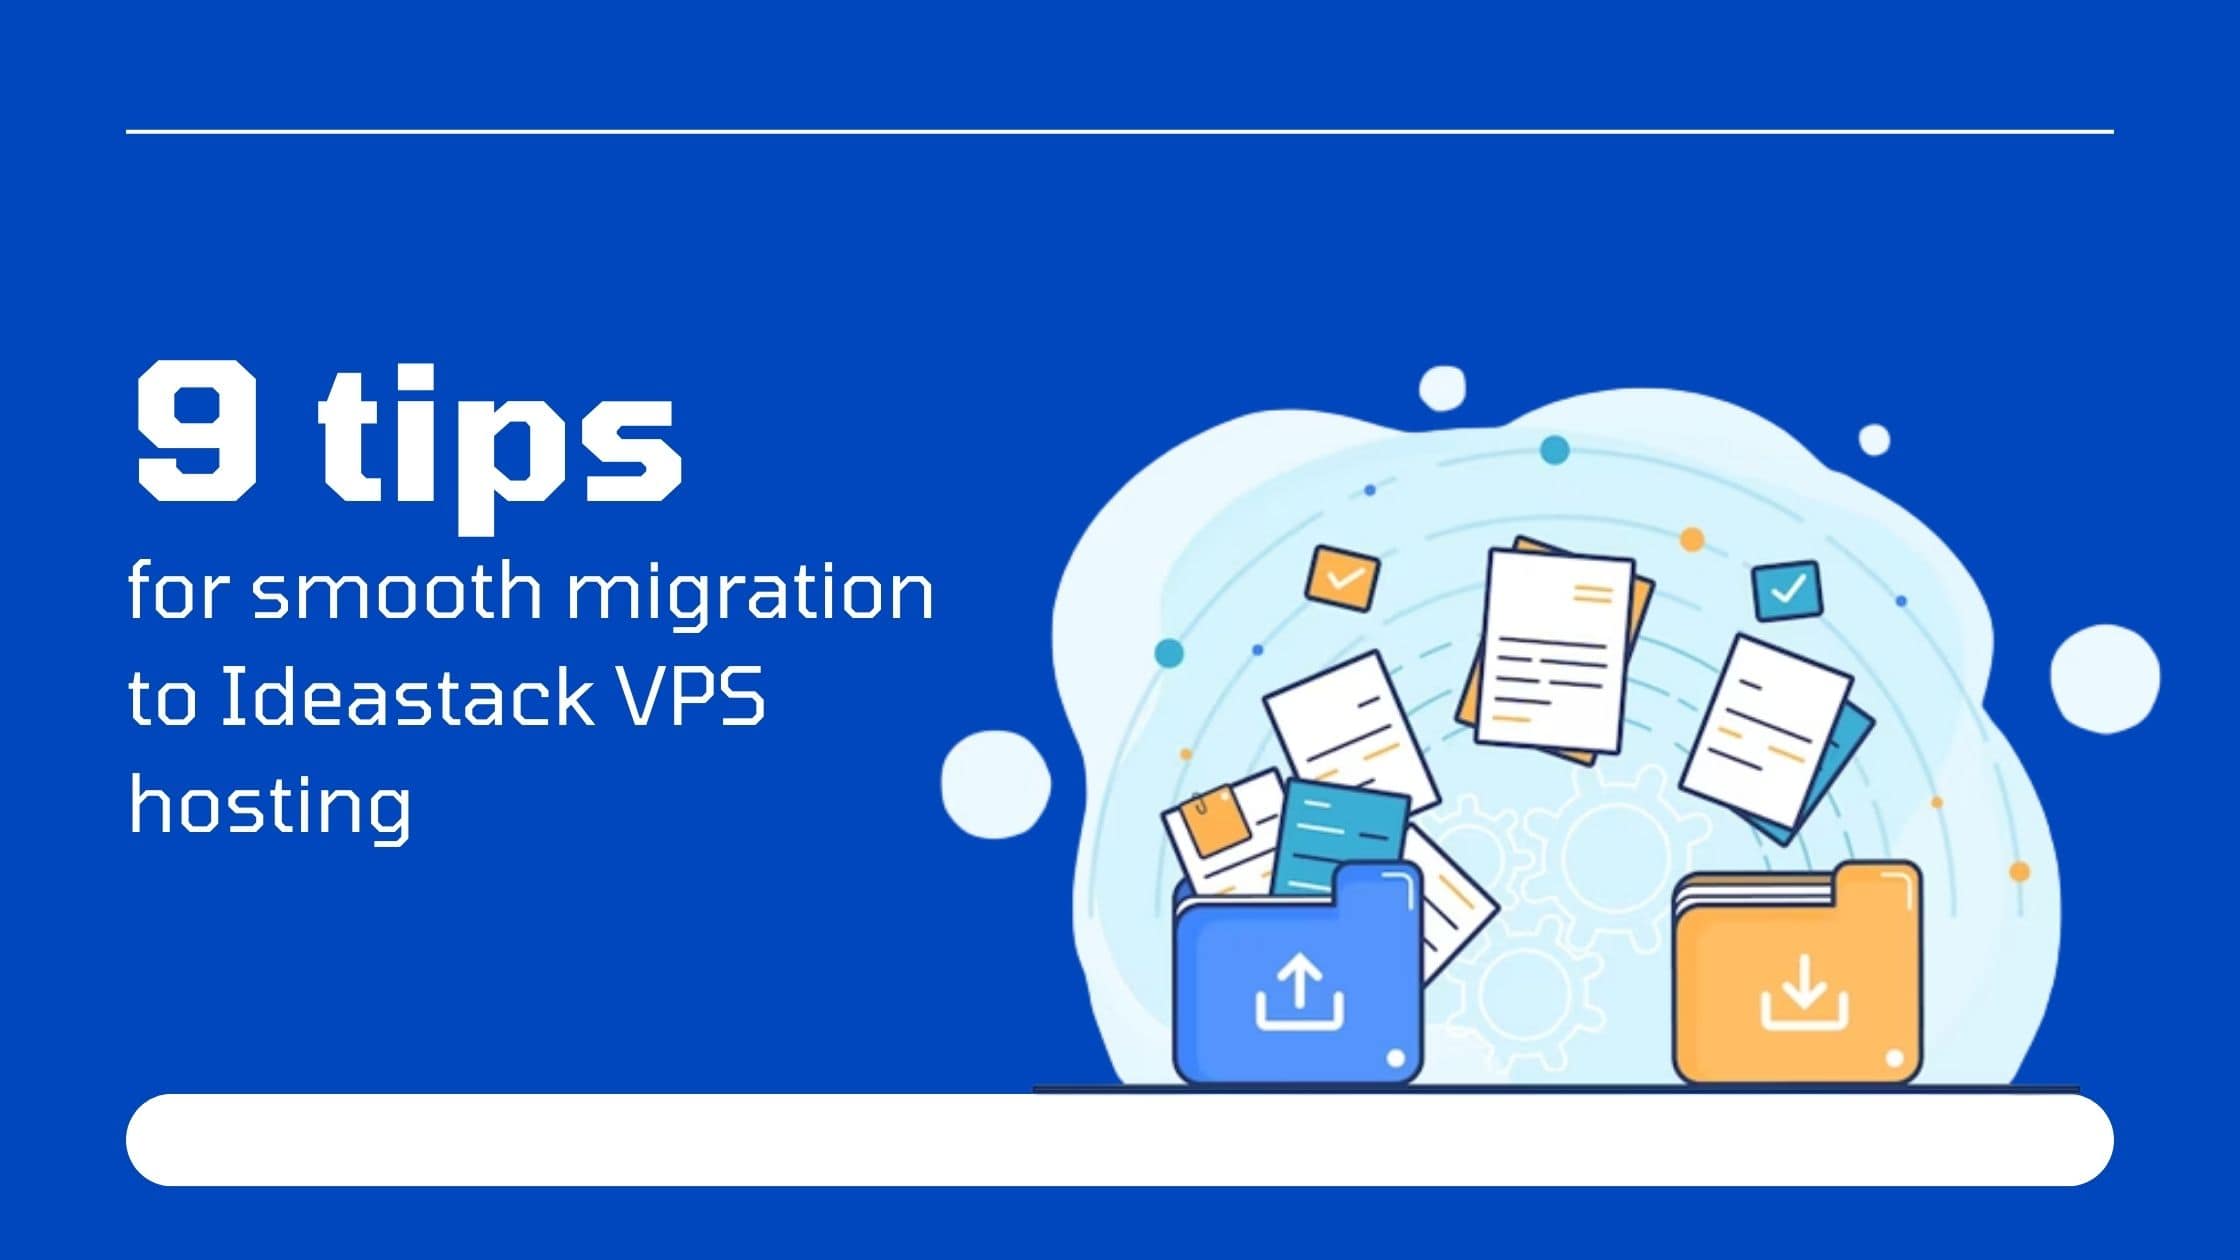 9 tips for smooth migration to Ideastack VPS hosting